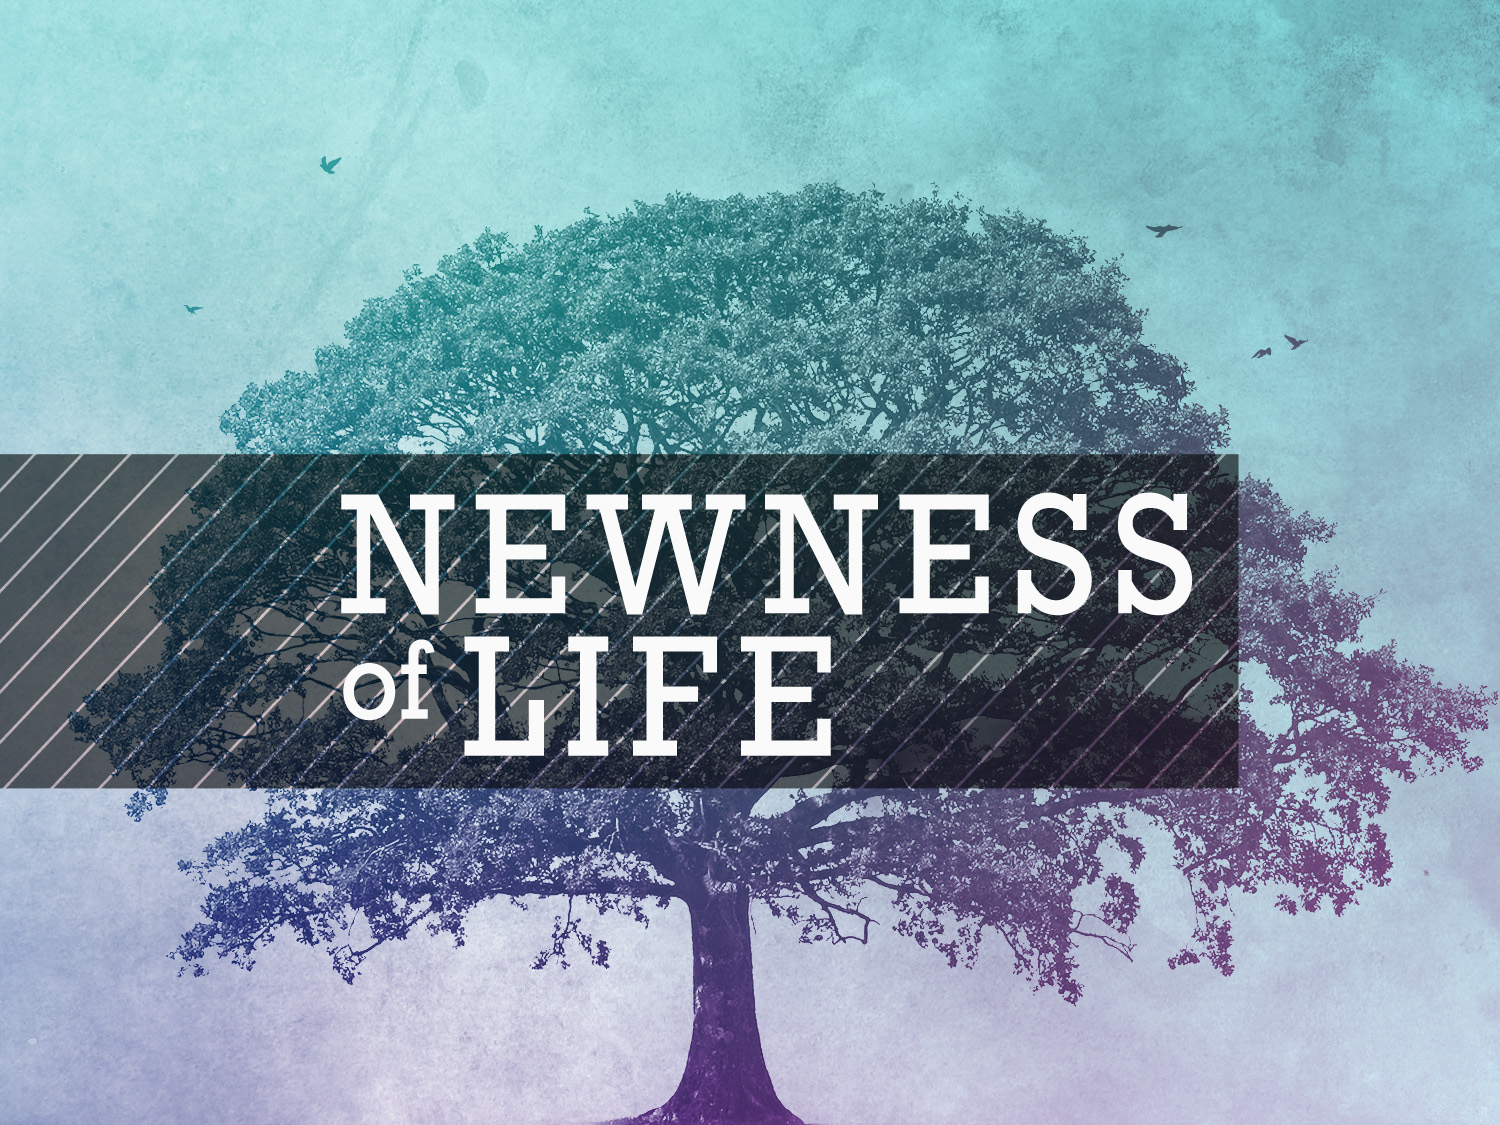 Walking in Newness of Life